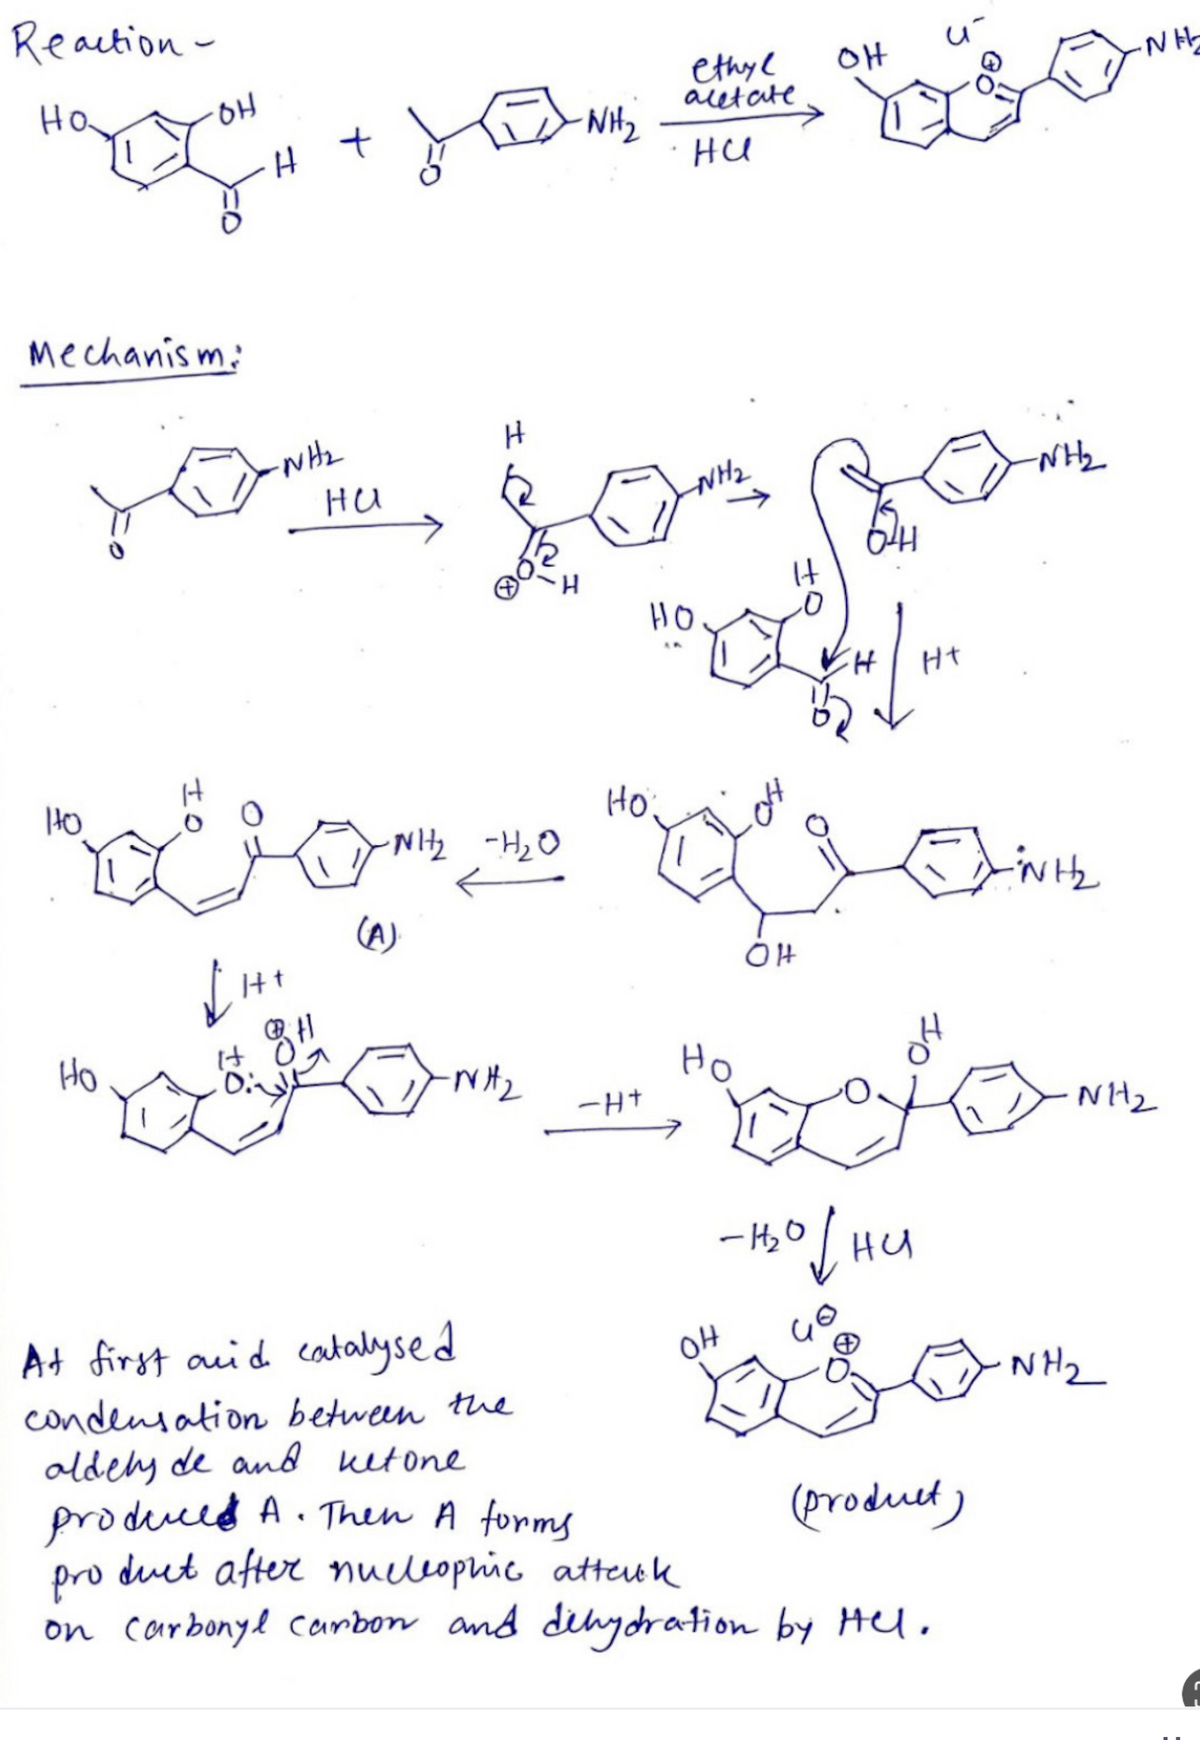 Reaction -
Mechanism:
OH
Ho
H +
Ho
-NH₂
-NH₂
you fos por
на
-NH₂
-NH₂
но
on
NH2 - H2O
H
ethyl
acetate
ни
HO:
OH
но
OH
L
-gorodom
Но
-H+
-1₂0
H
Ht
TNH
војни
At first and catalysed
condensation between the
aldely de and ketone
(product)
produced A. Then A forms
product after nucleophic attauk
on carbonyl carbon and dehydration by Hel.
NH
NH₂
NH₂